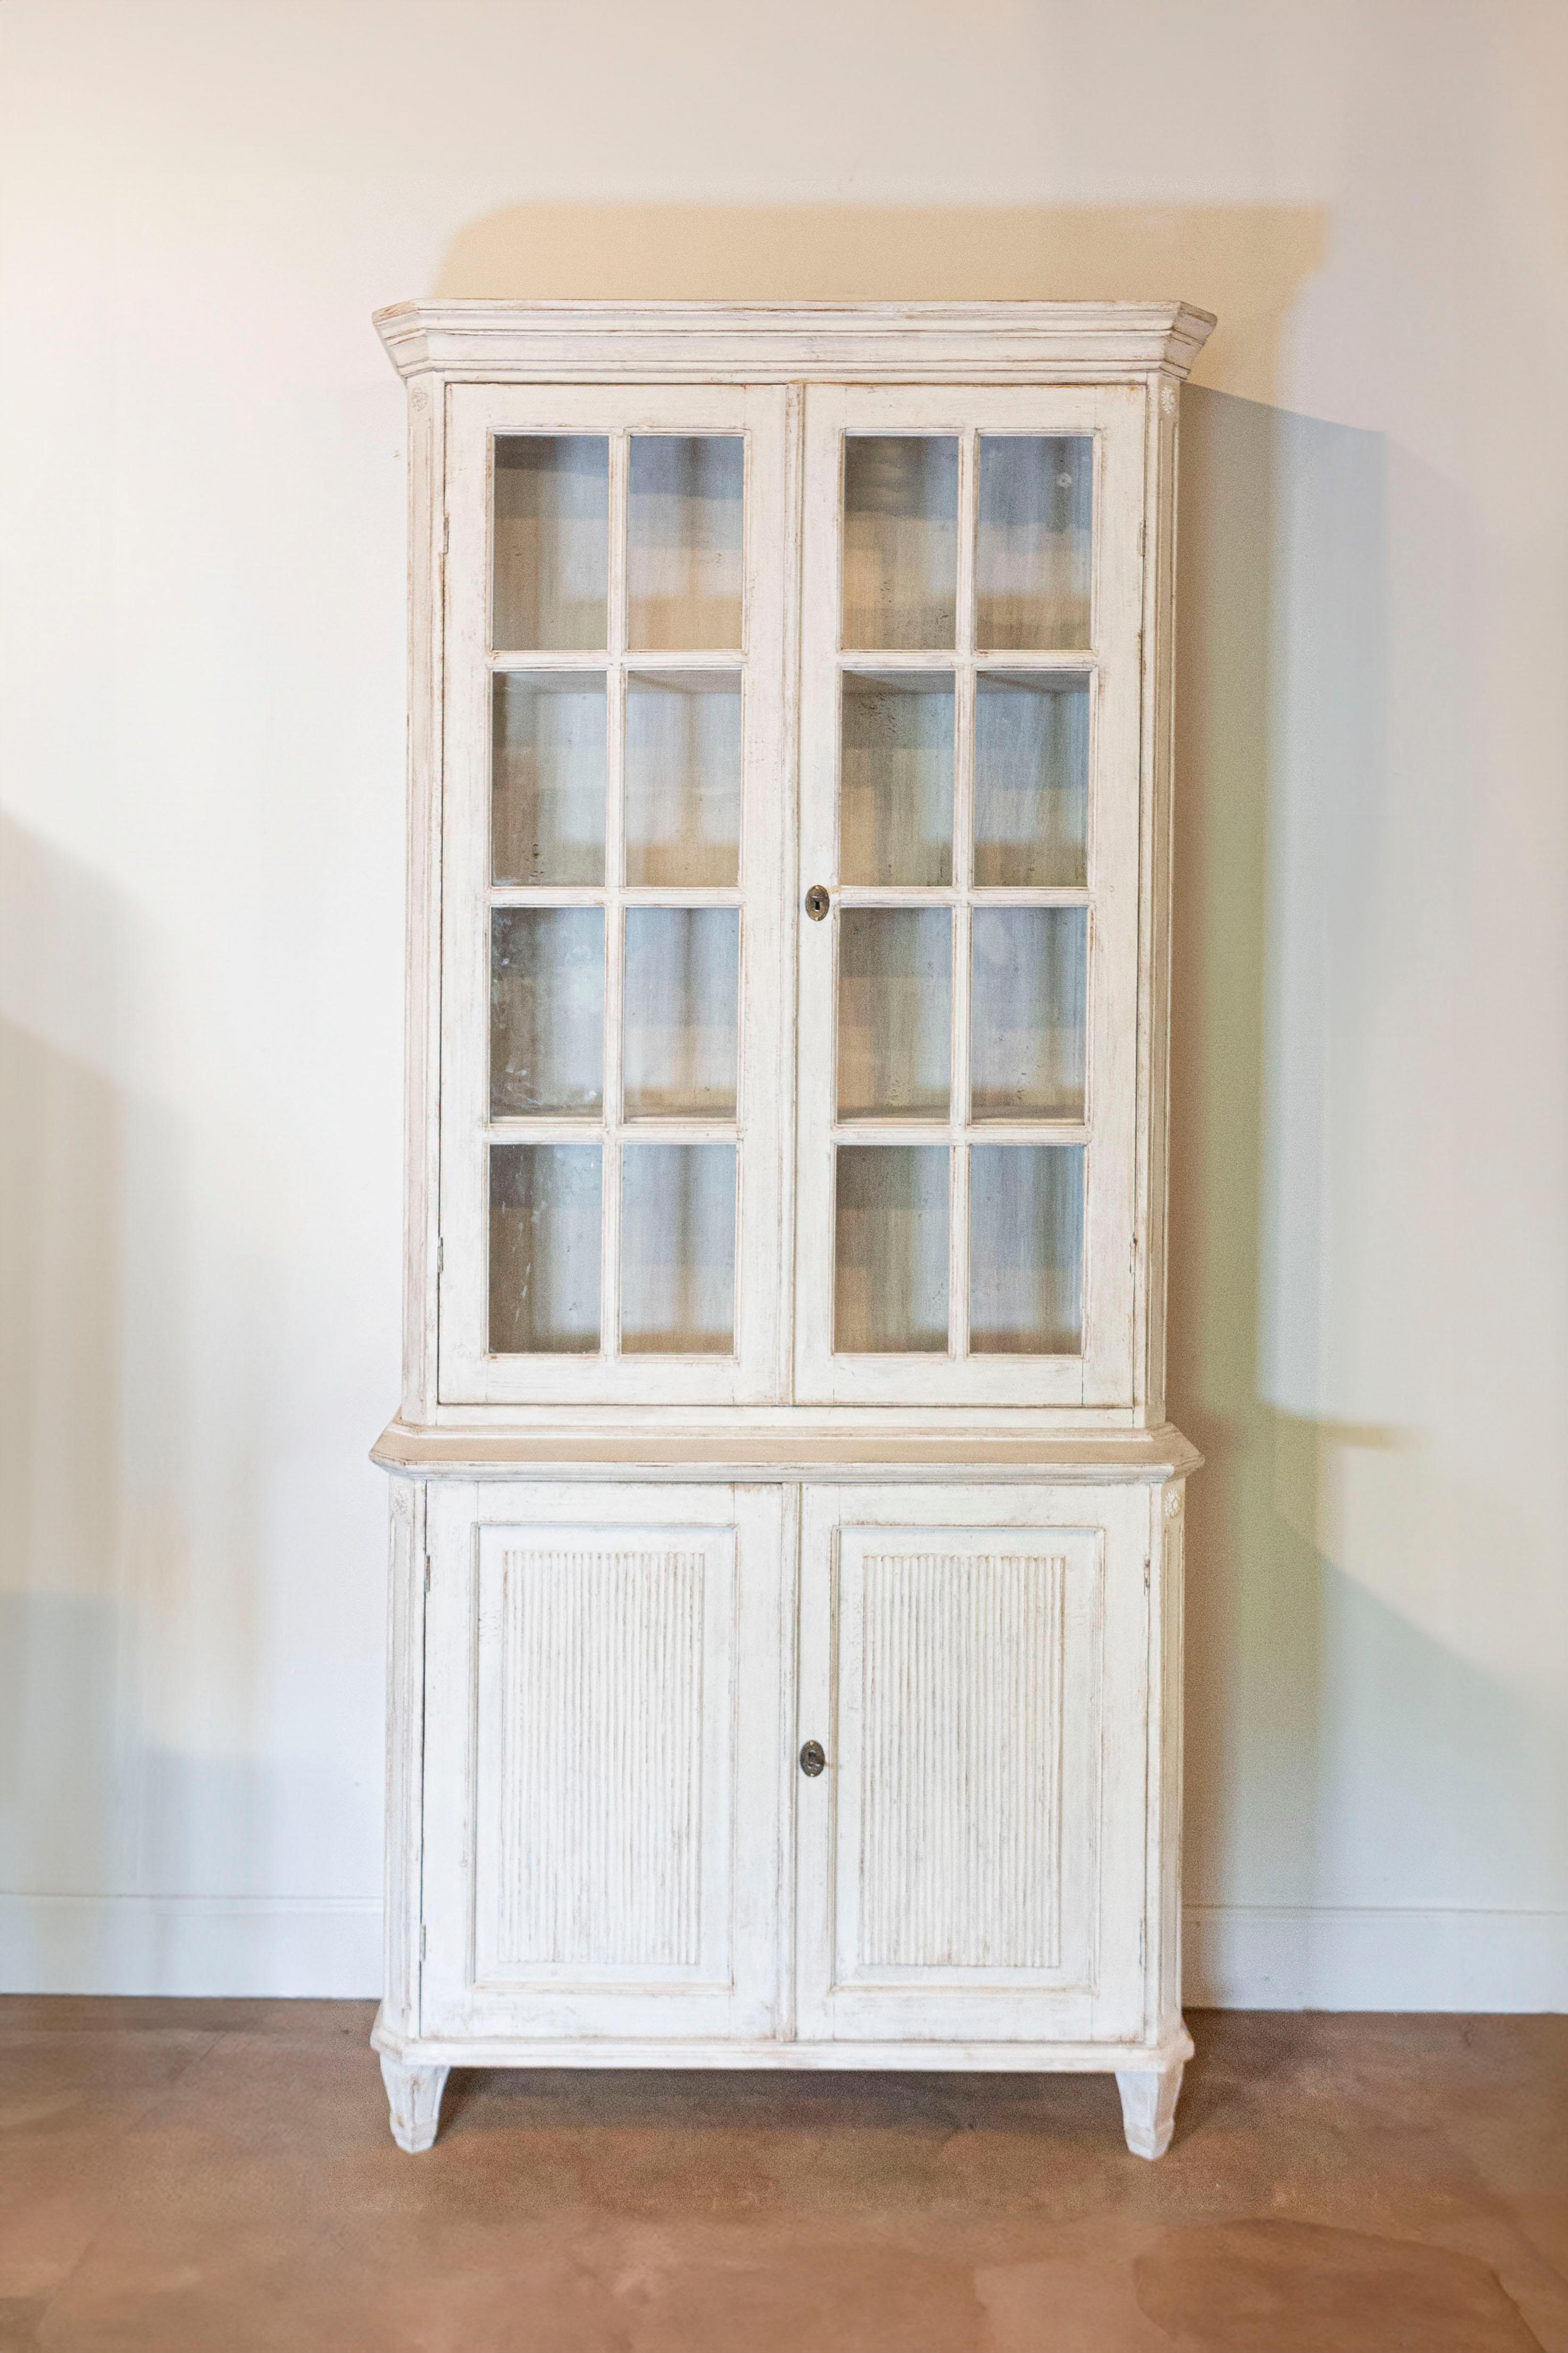 A Swedish Gustavian style two-part vitrine cabinet from the 19th century with light gray / cream painted finish, glass doors, carved reeded panels and tapered feet. Immerse yourself in the timeless elegance of this Swedish Gustavian style two-part